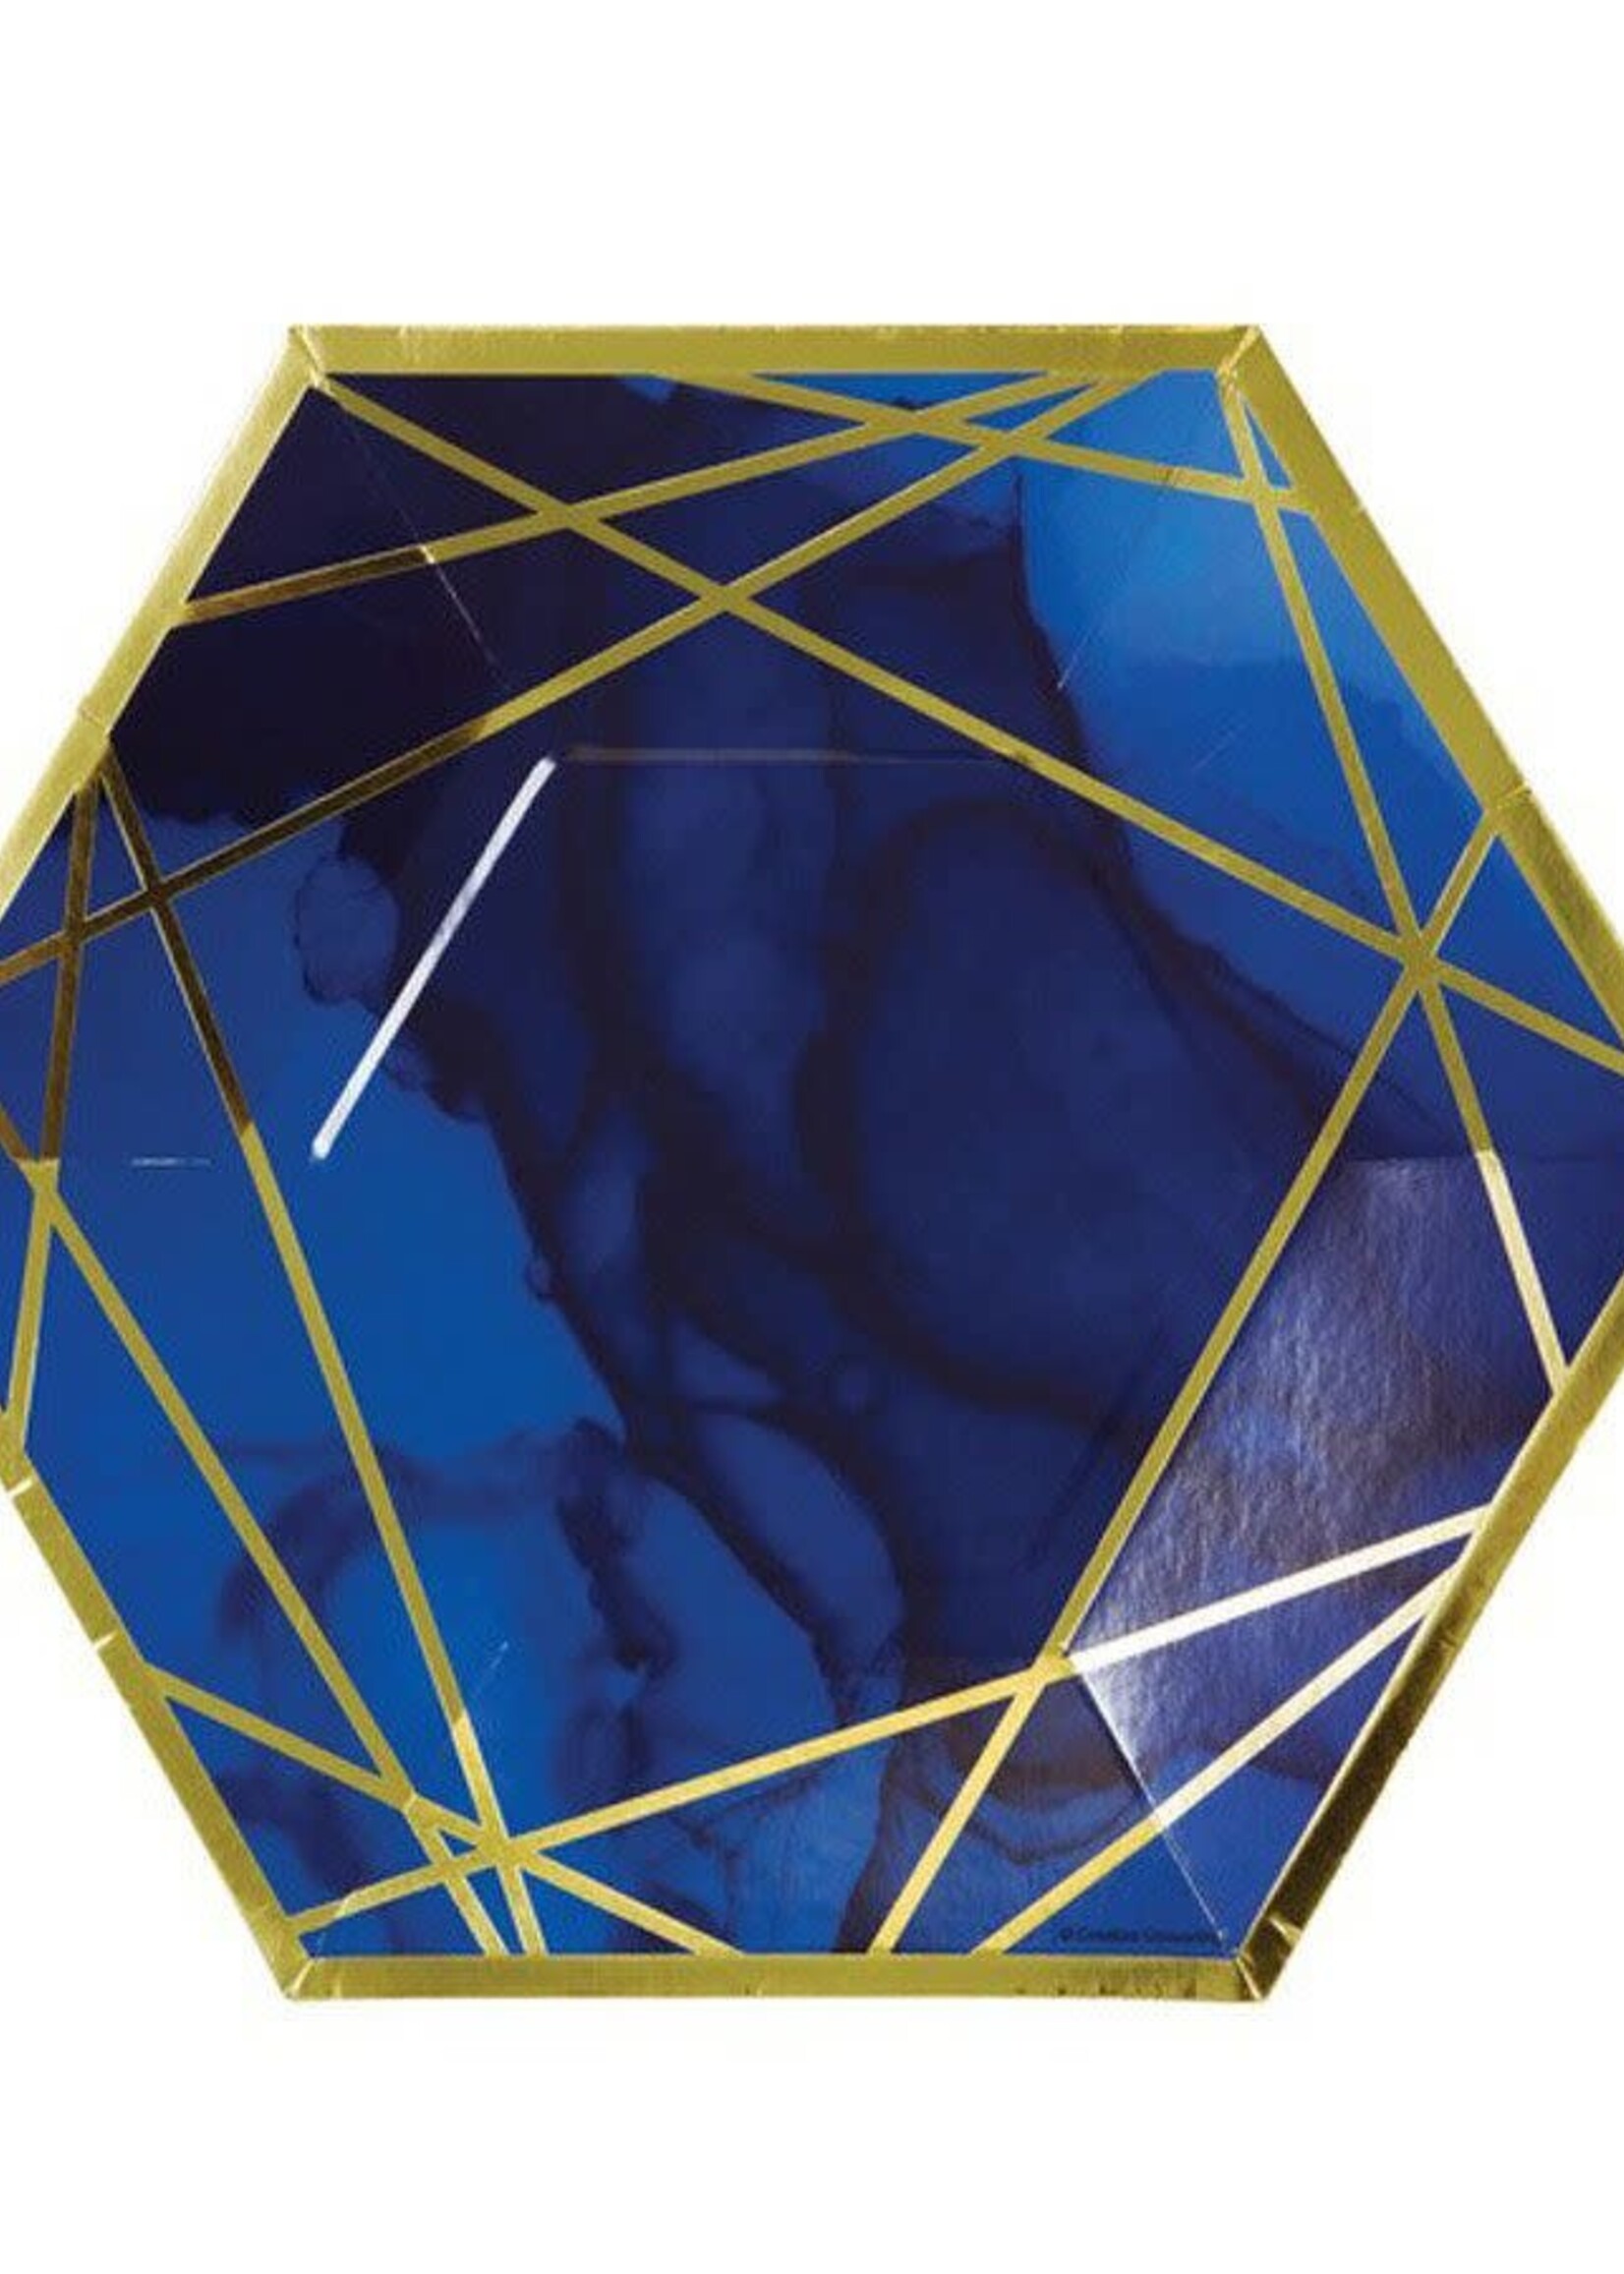 PLATE 8CT HEX SHAPE NAVY GOLD GEODE